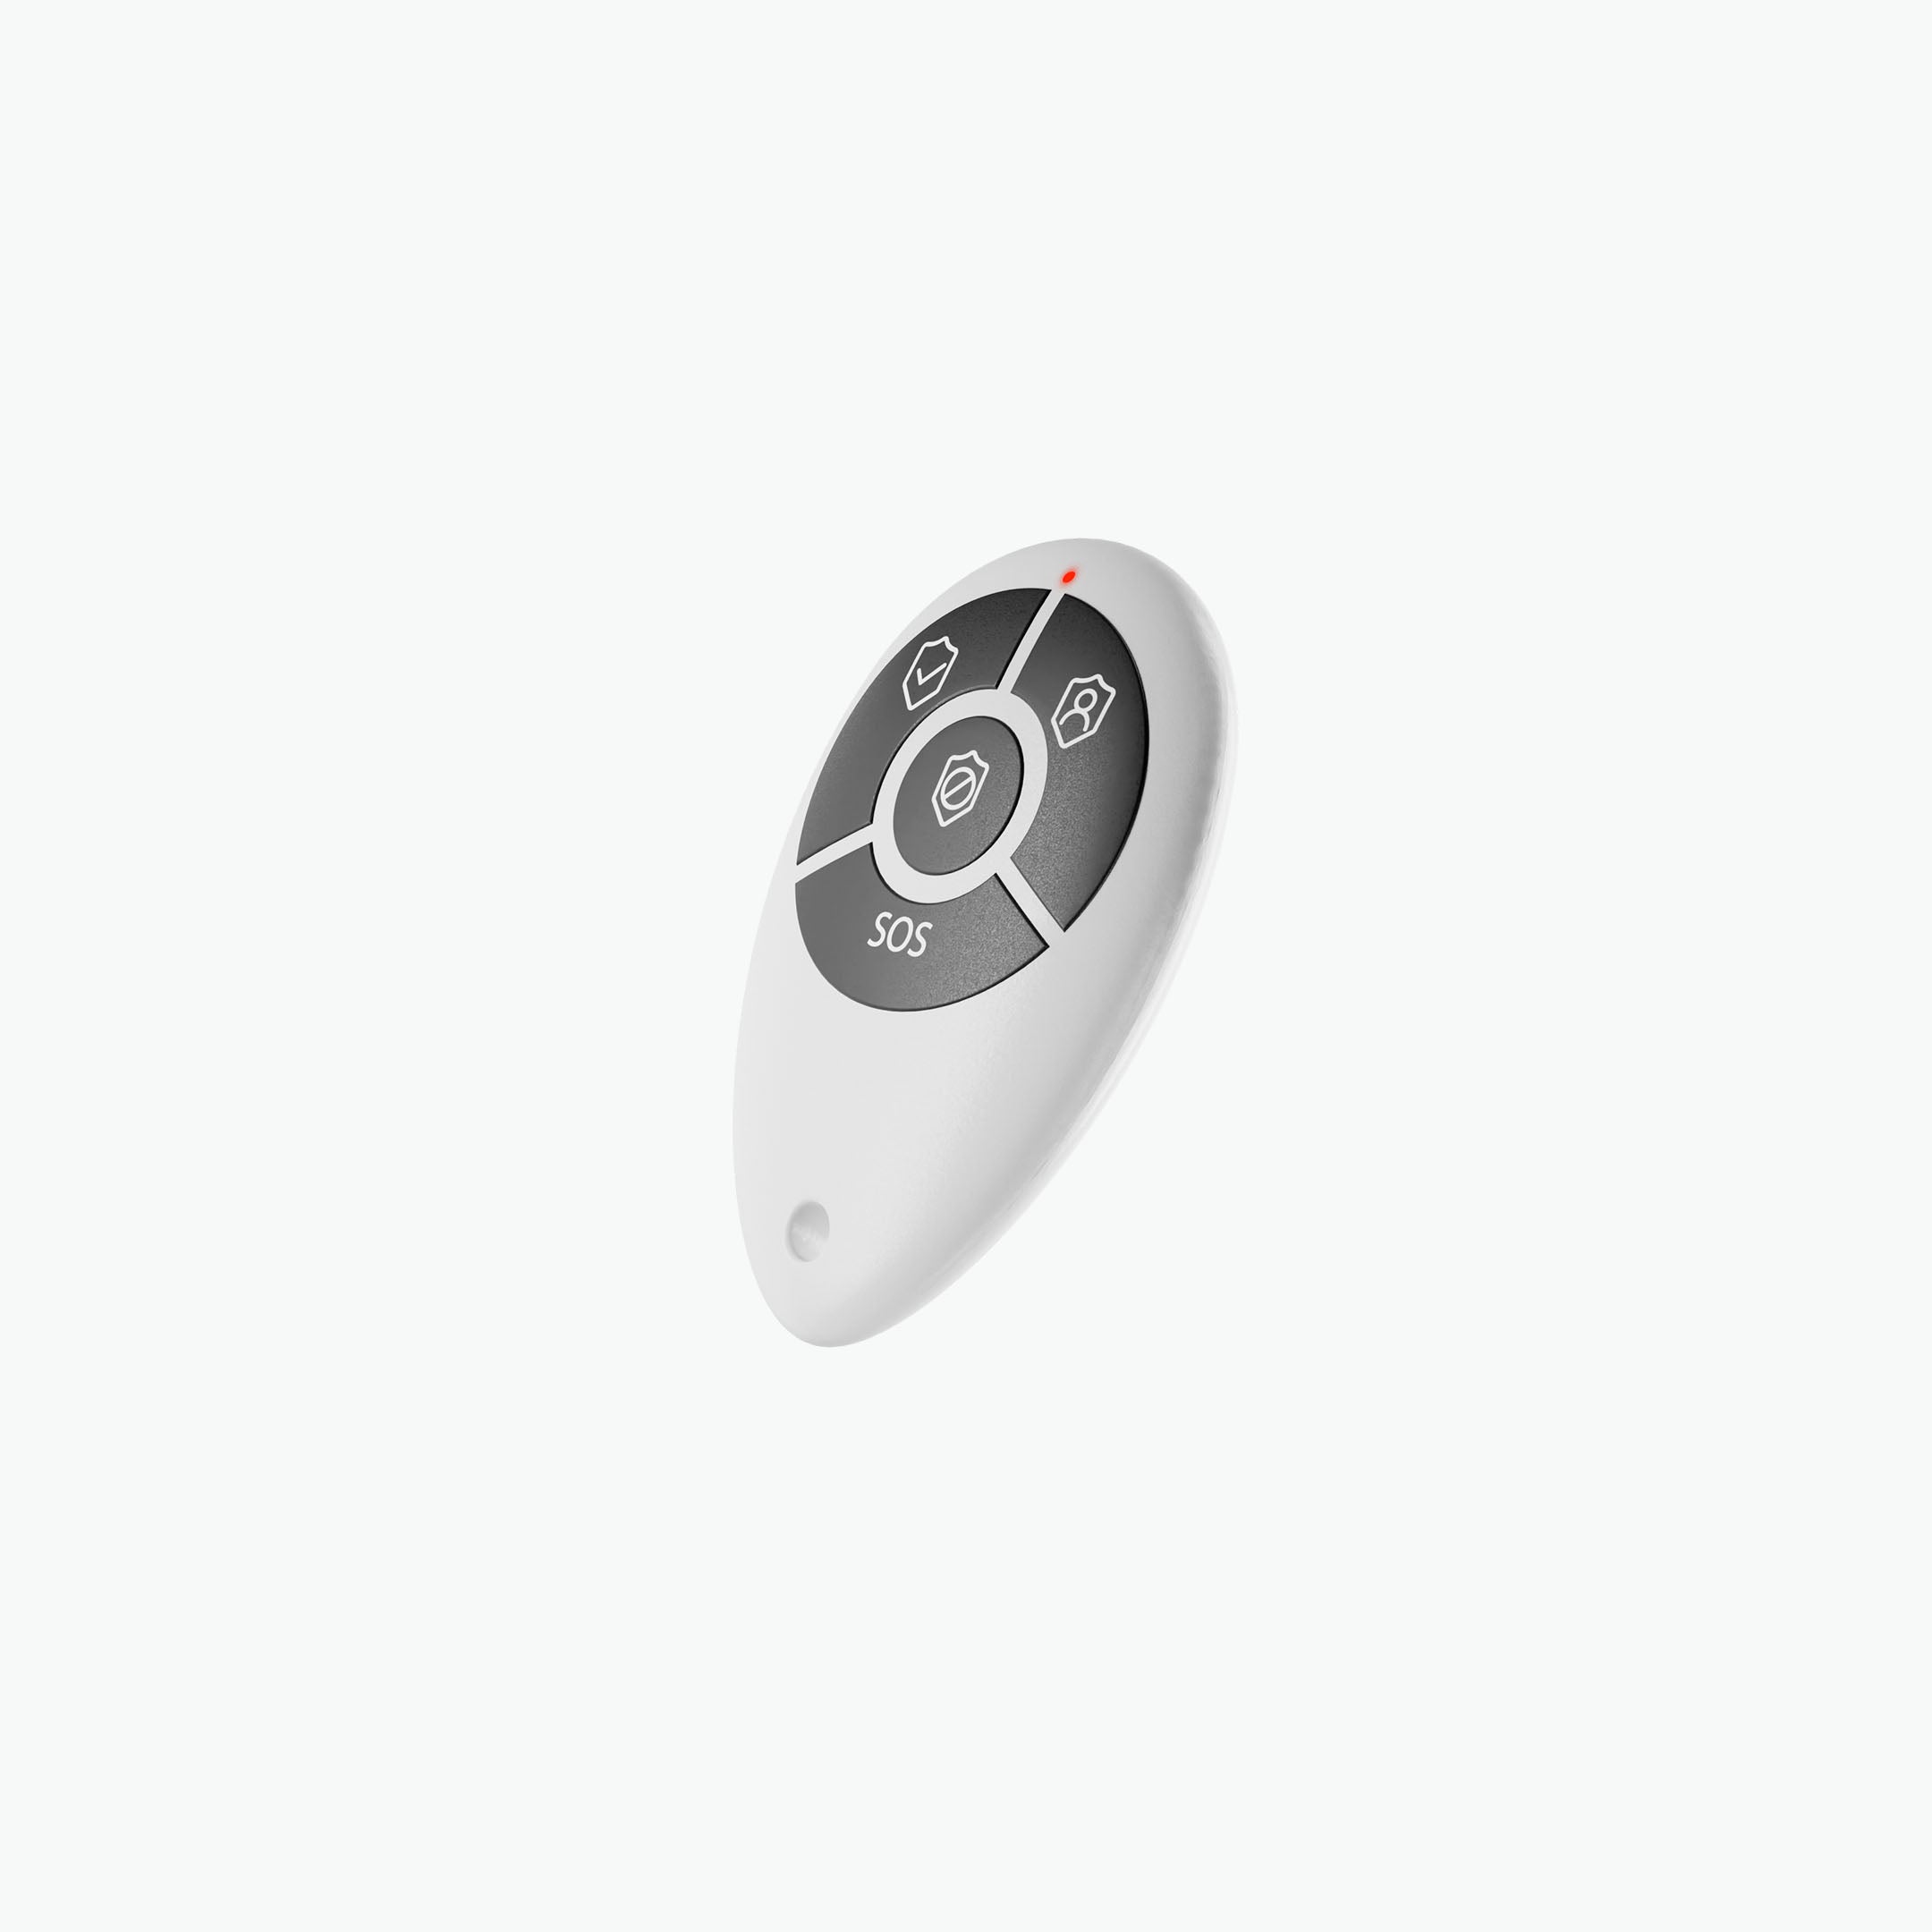 Staniot R01 Wireless Security Mini Remote control for SecPanel Management on a white background